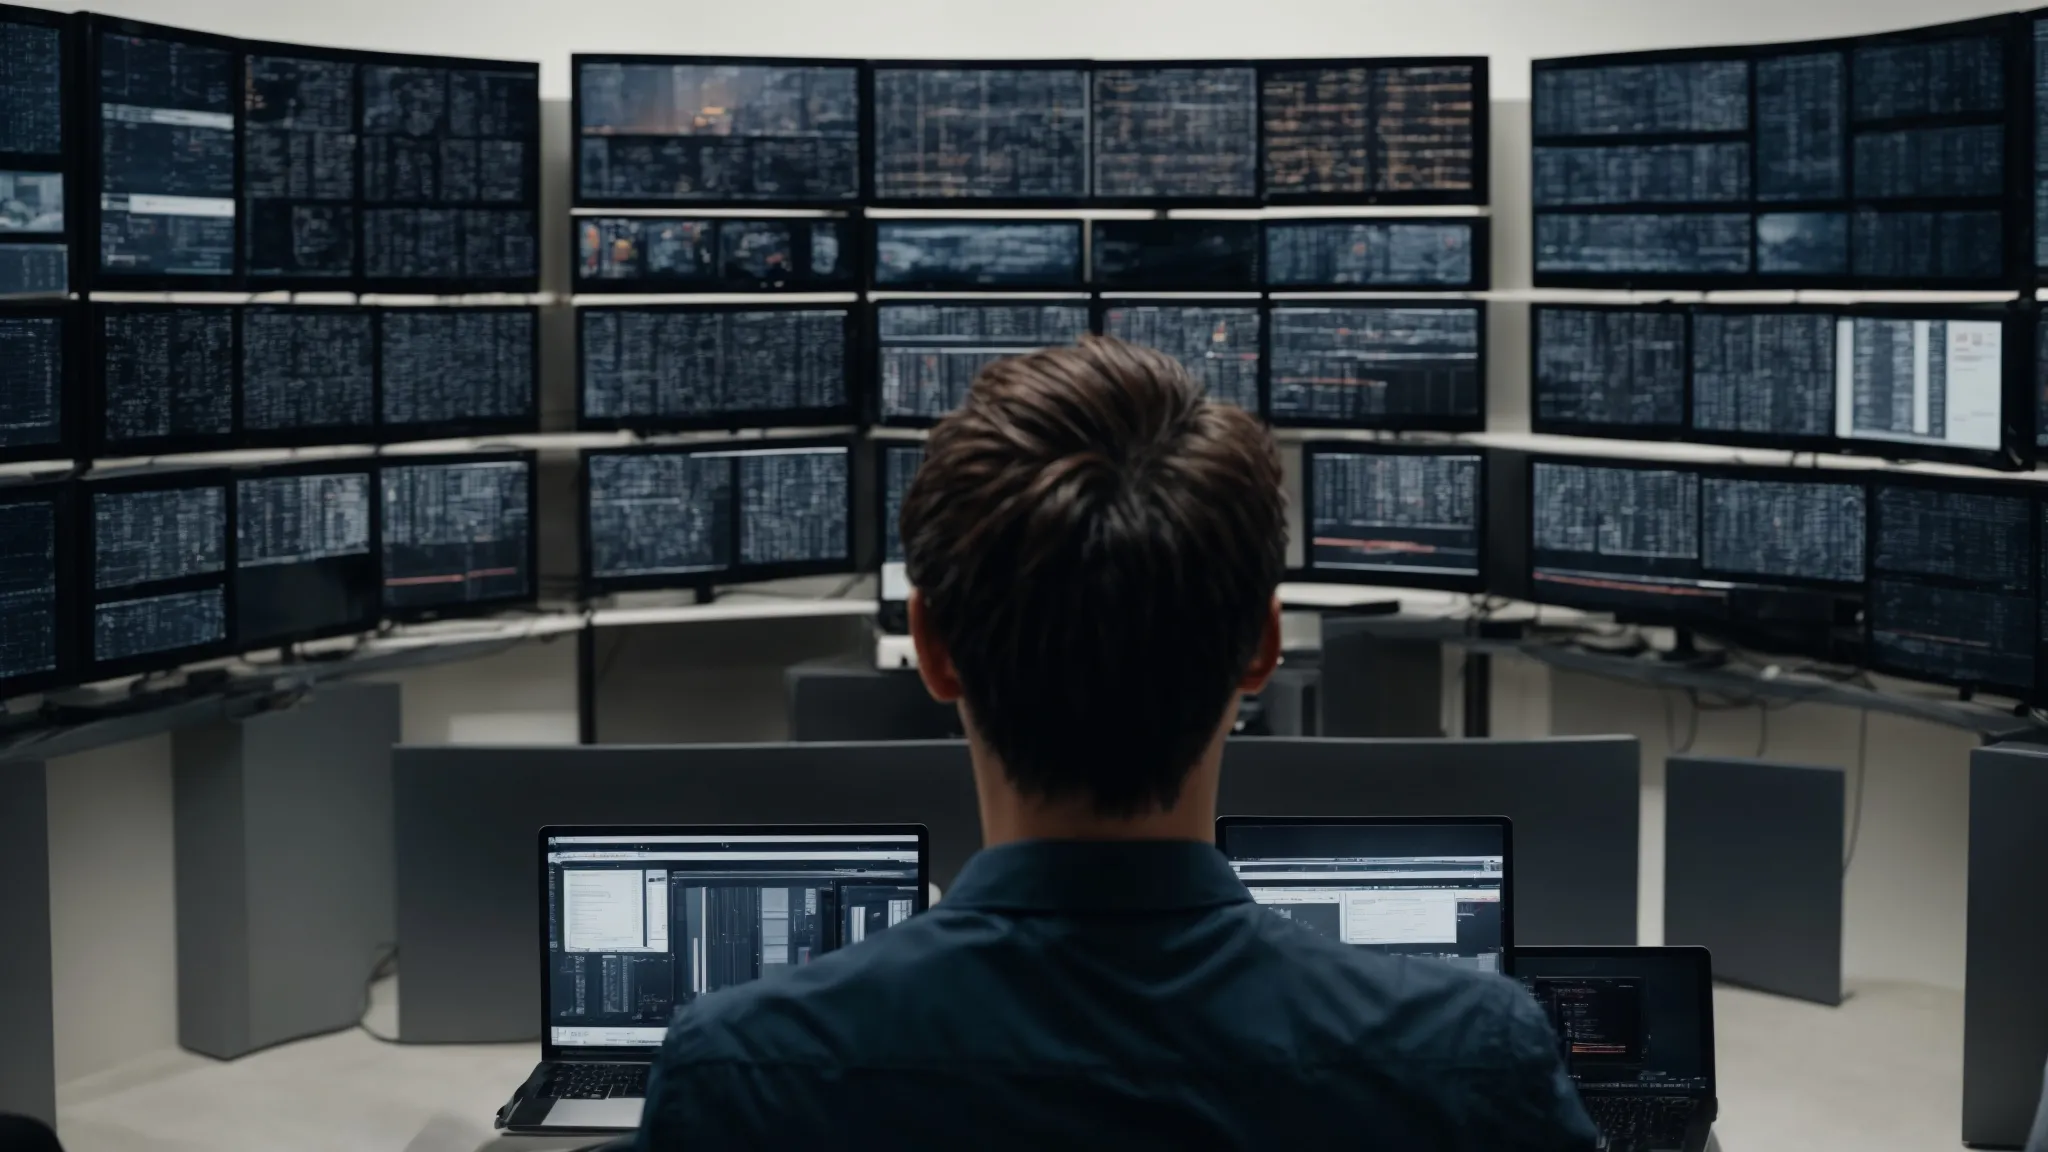 a person thoughtfully surveys an array of visually distinct computer screens, each showcasing different layouts and designs.